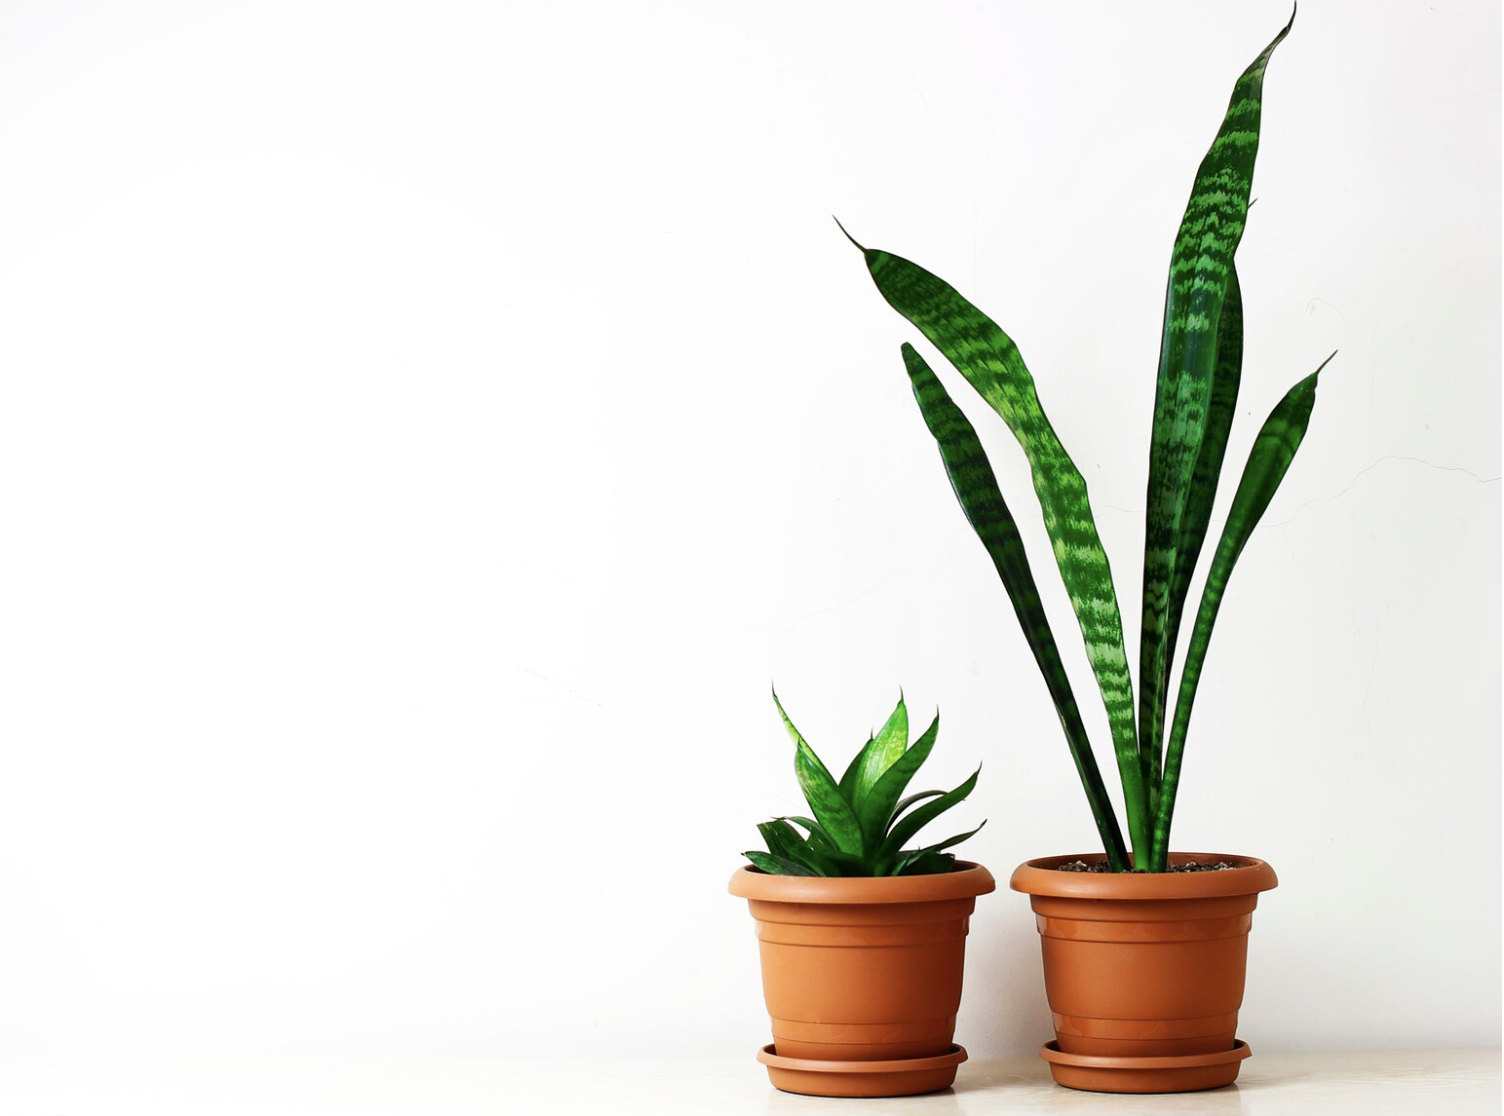 8 Good Luck Plants To Bring Positivity To Your Home